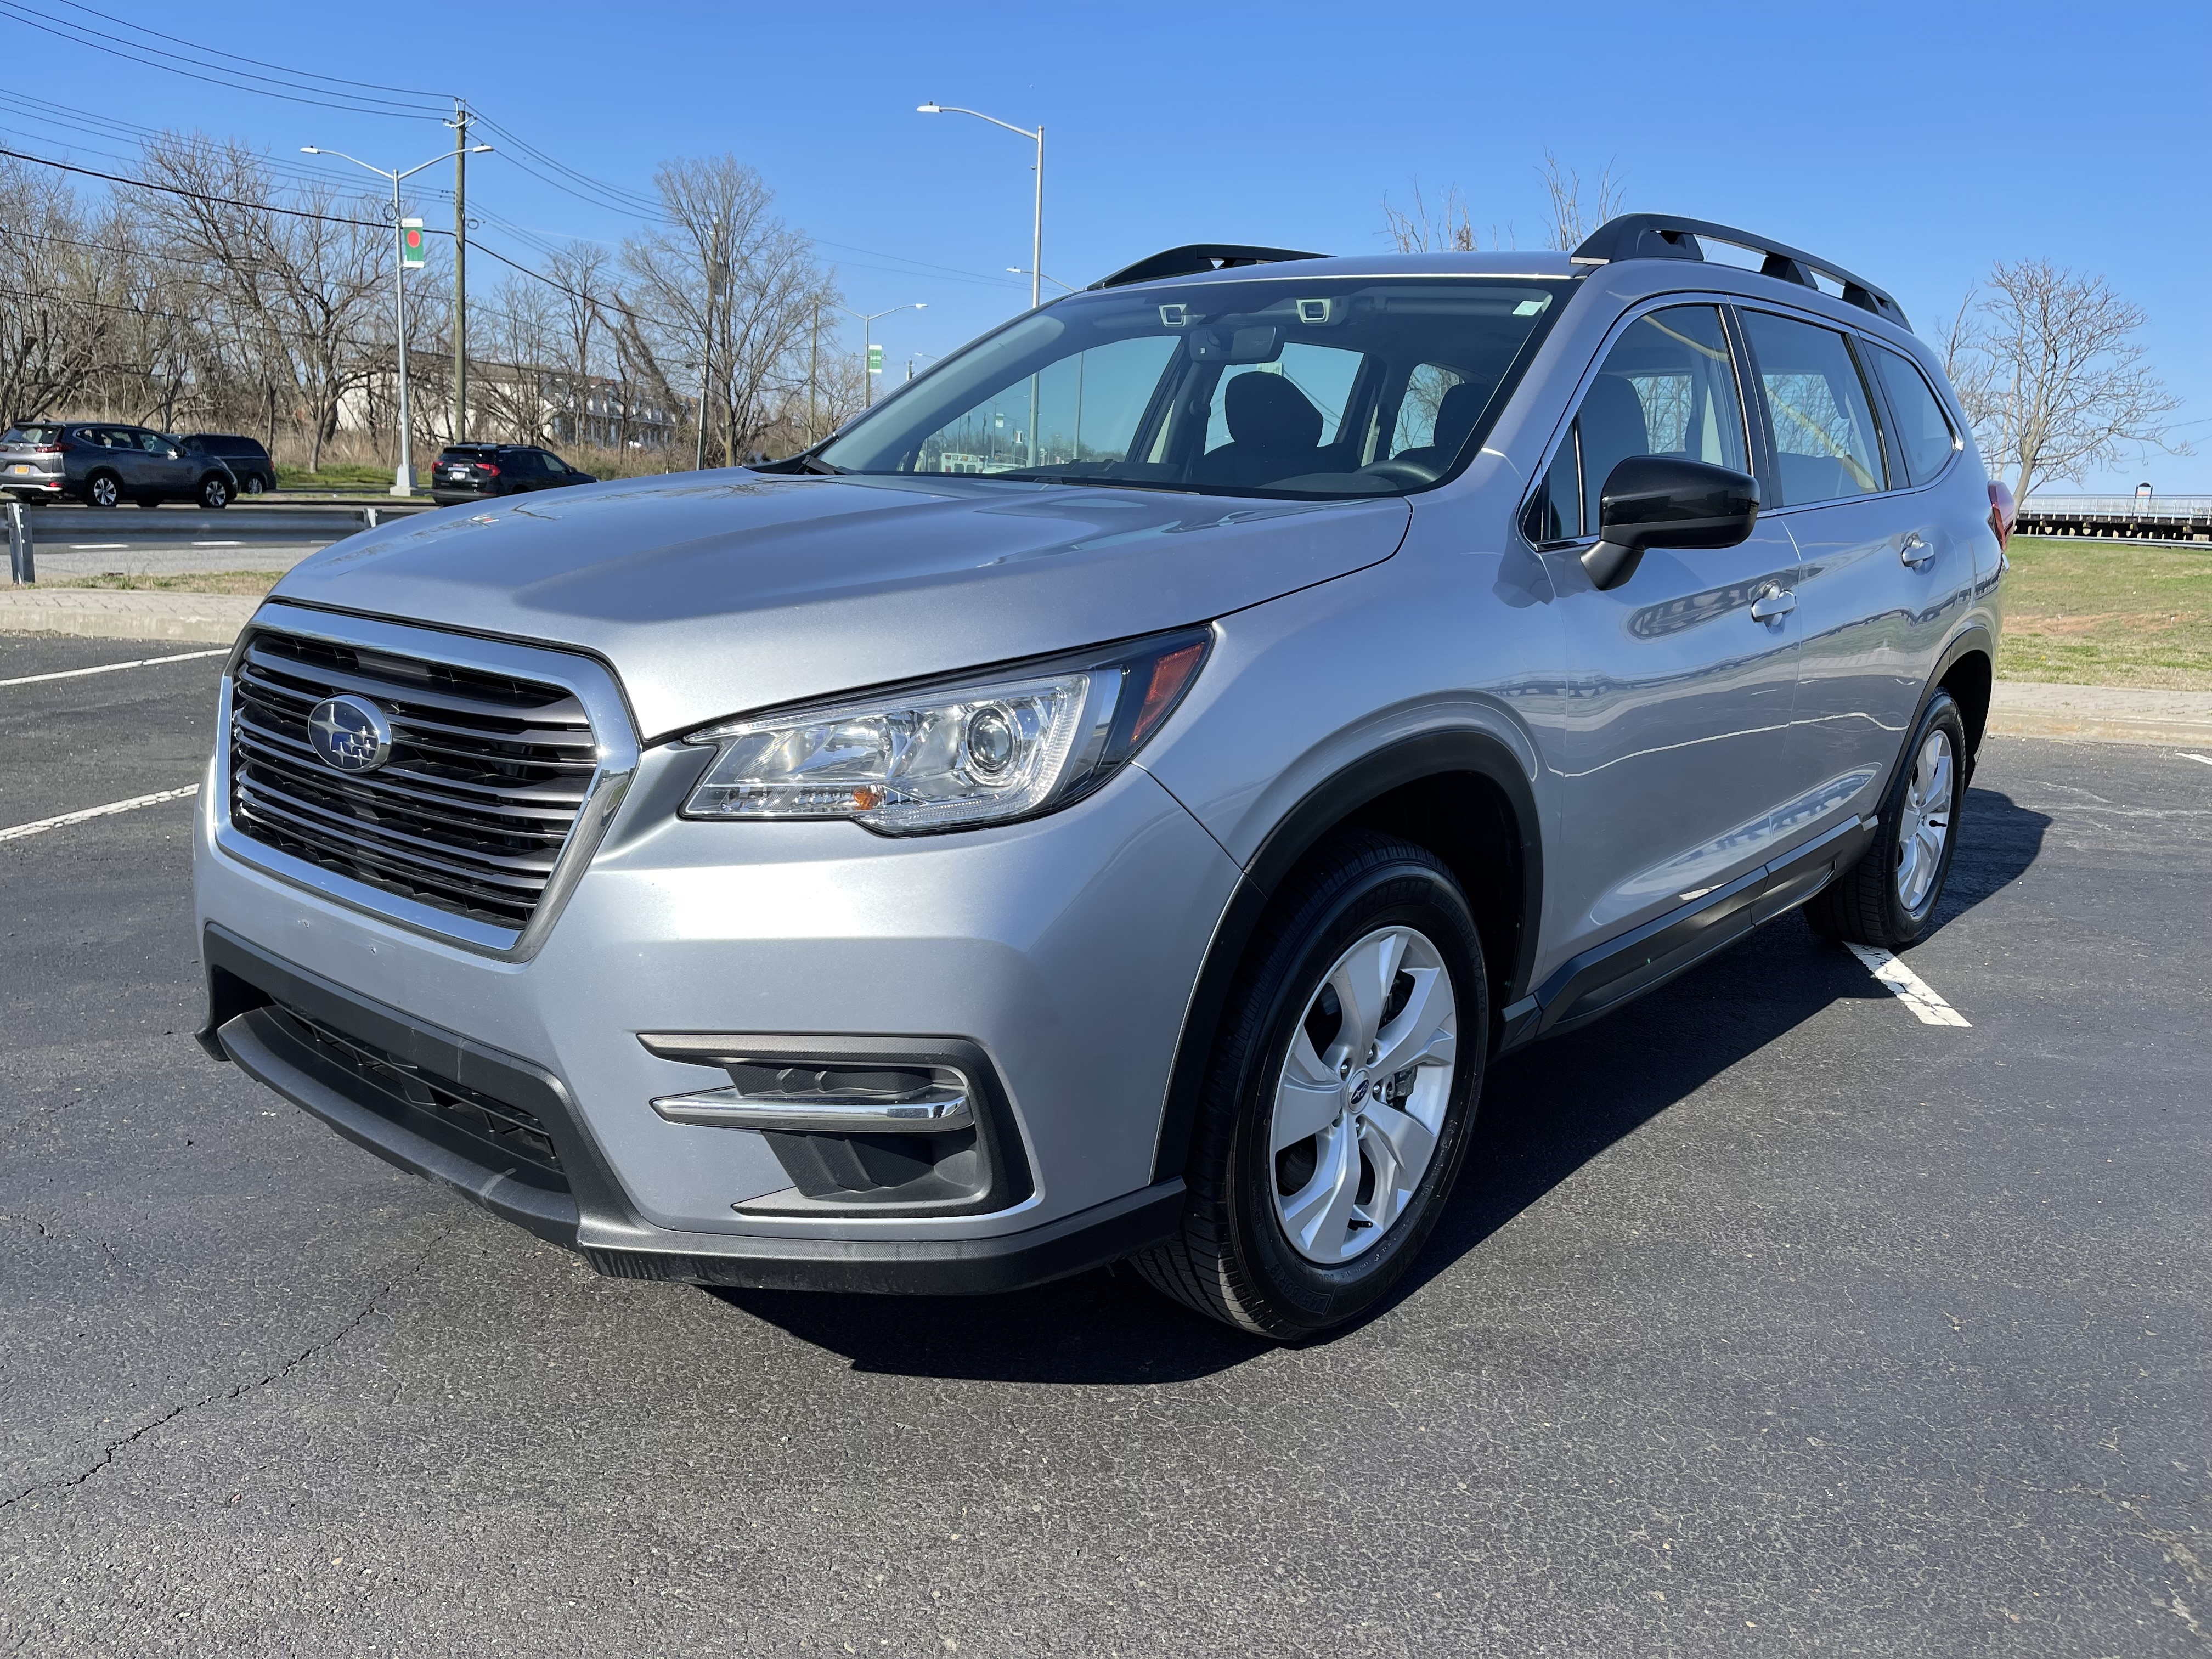 Used Car - 2020 Subaru Ascent AWD for Sale in Brooklyn, NY